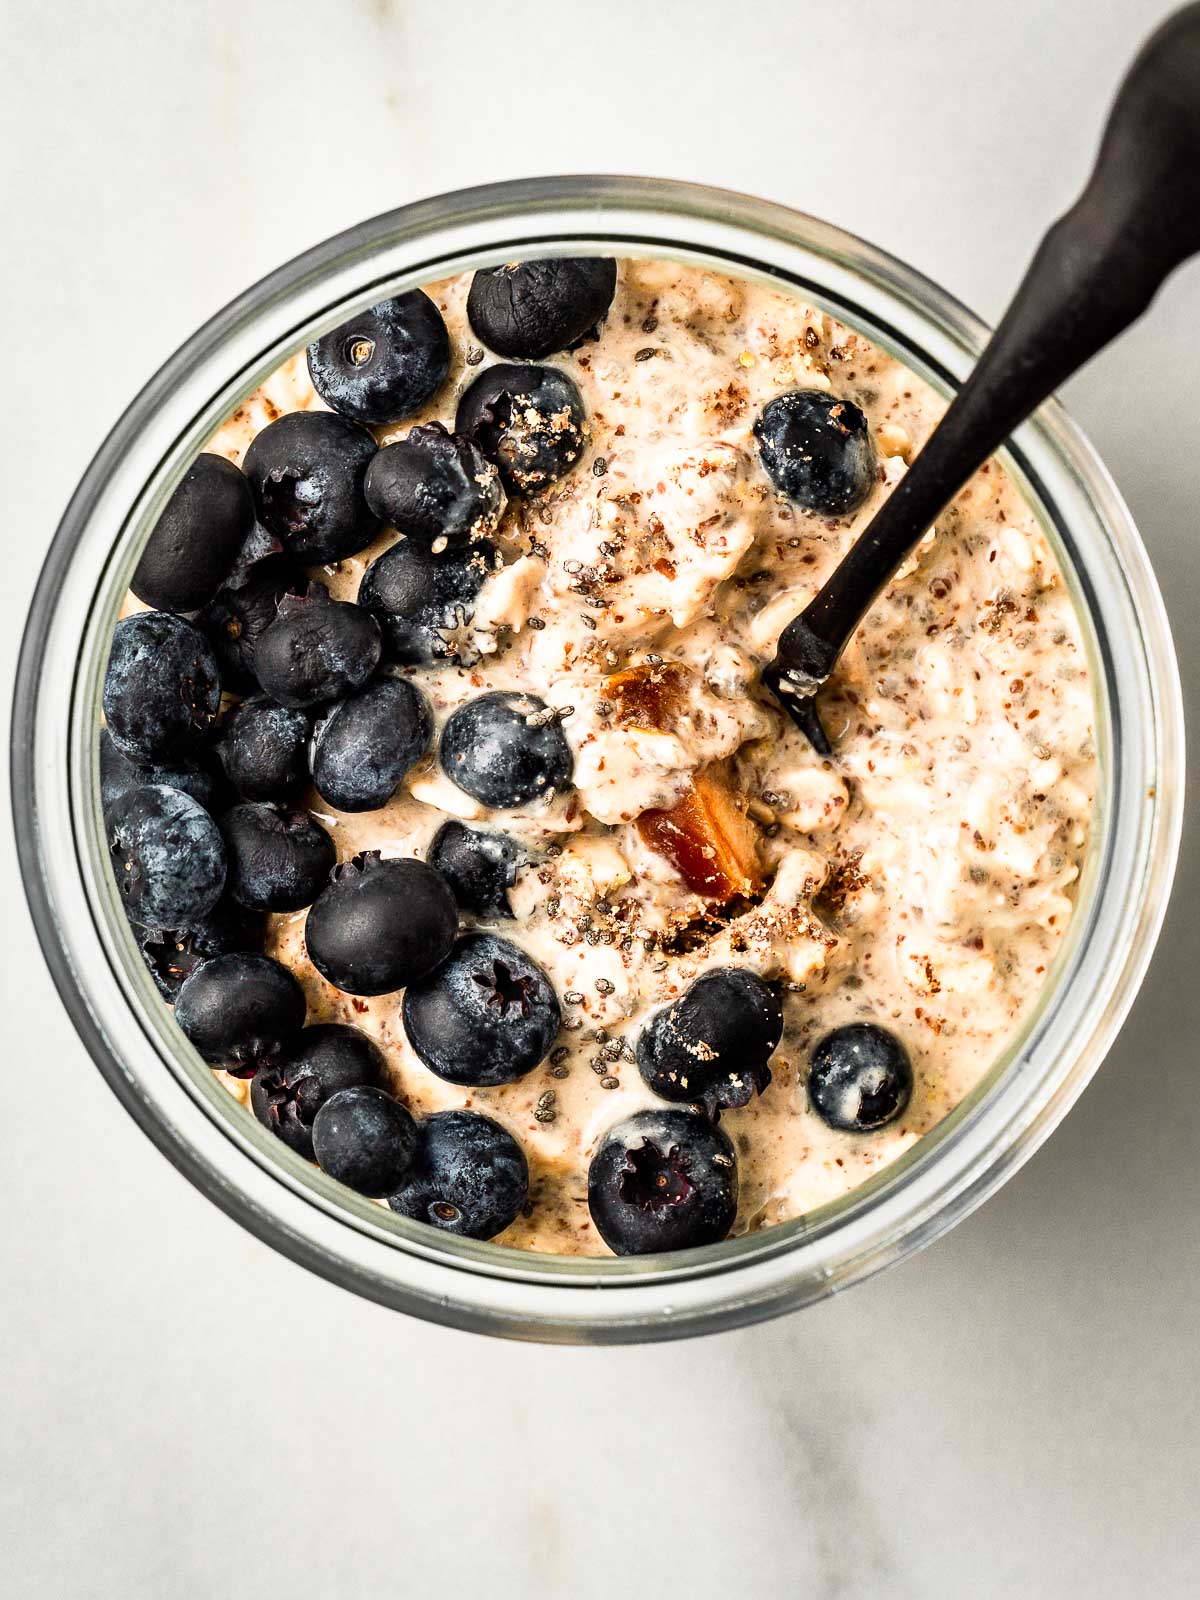 Overnights oats with blueberries and dates in a jar.